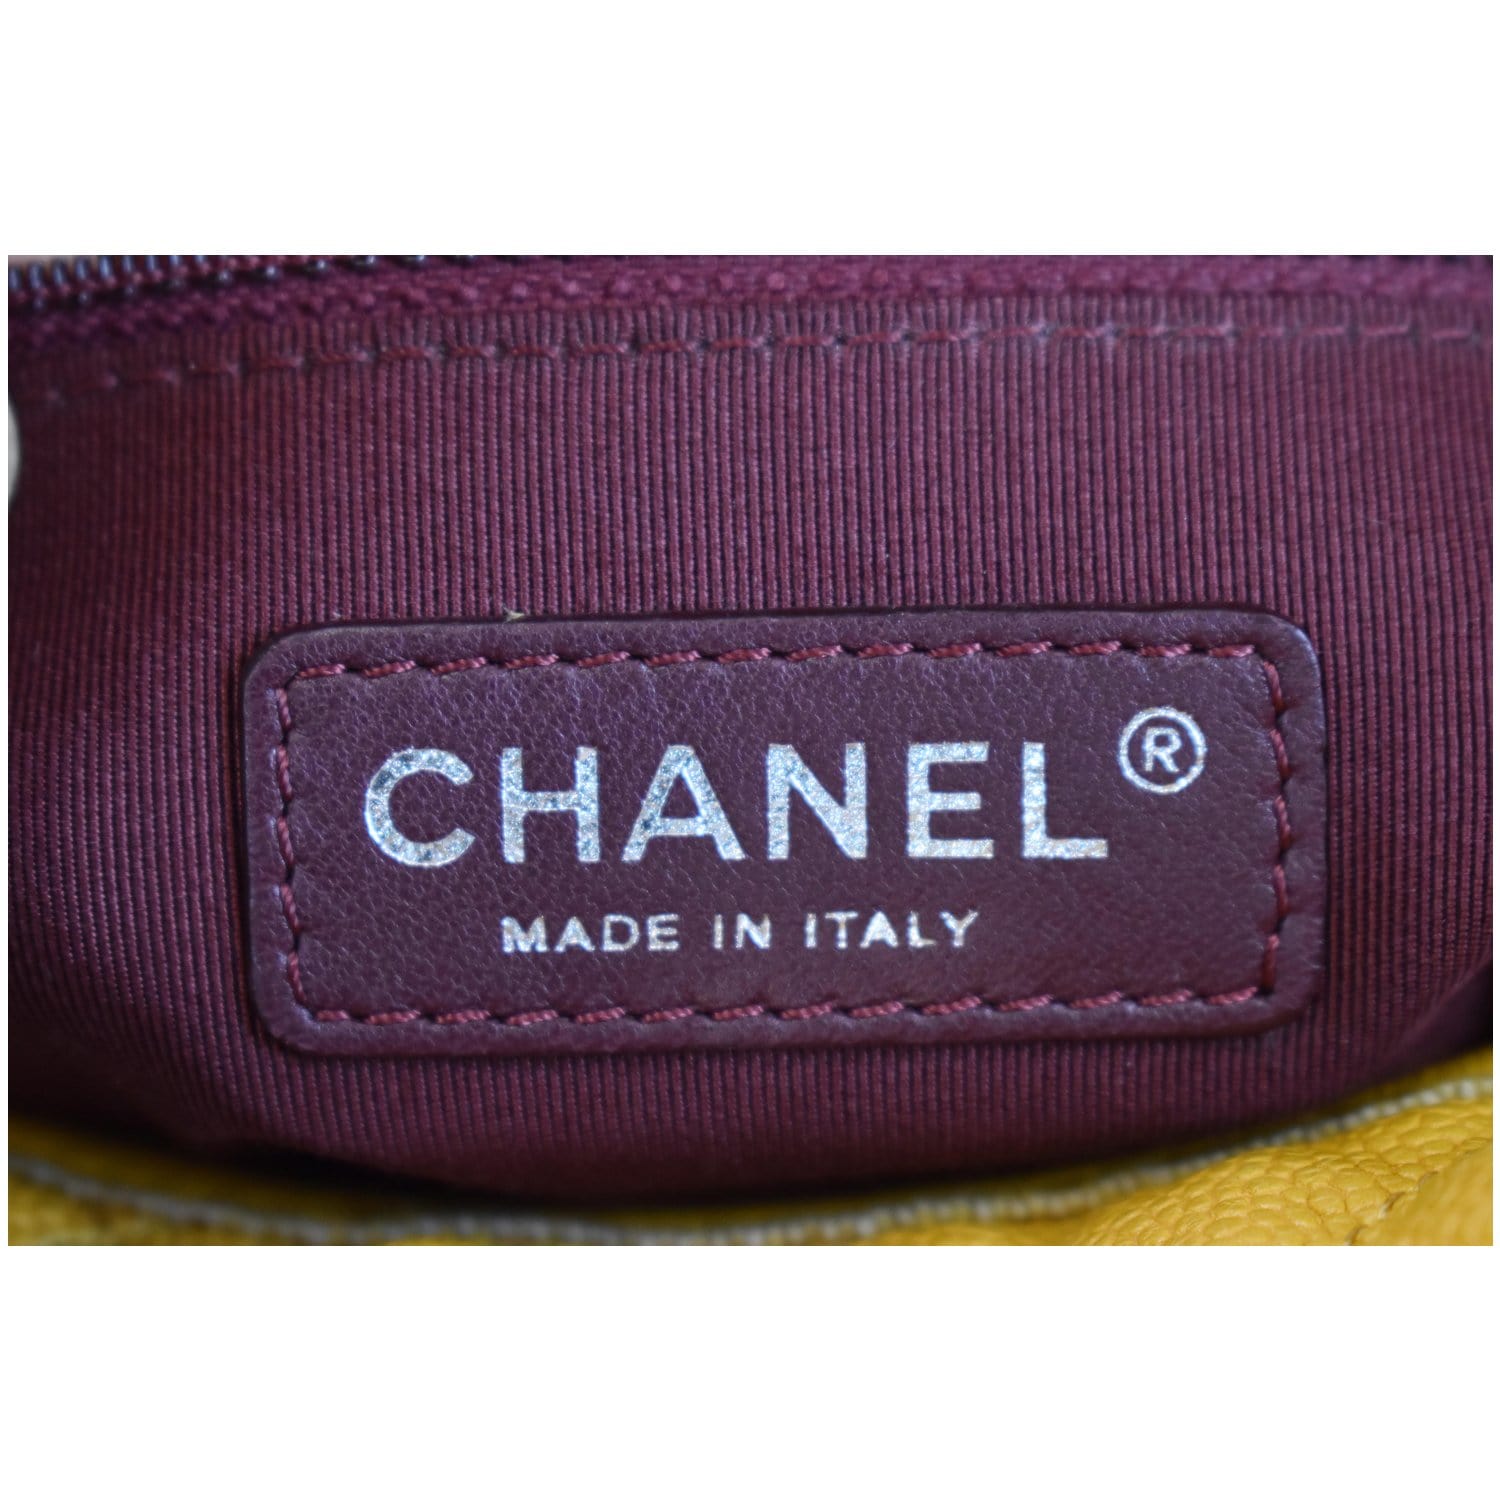 Are Chanel Bags From France or Italy?